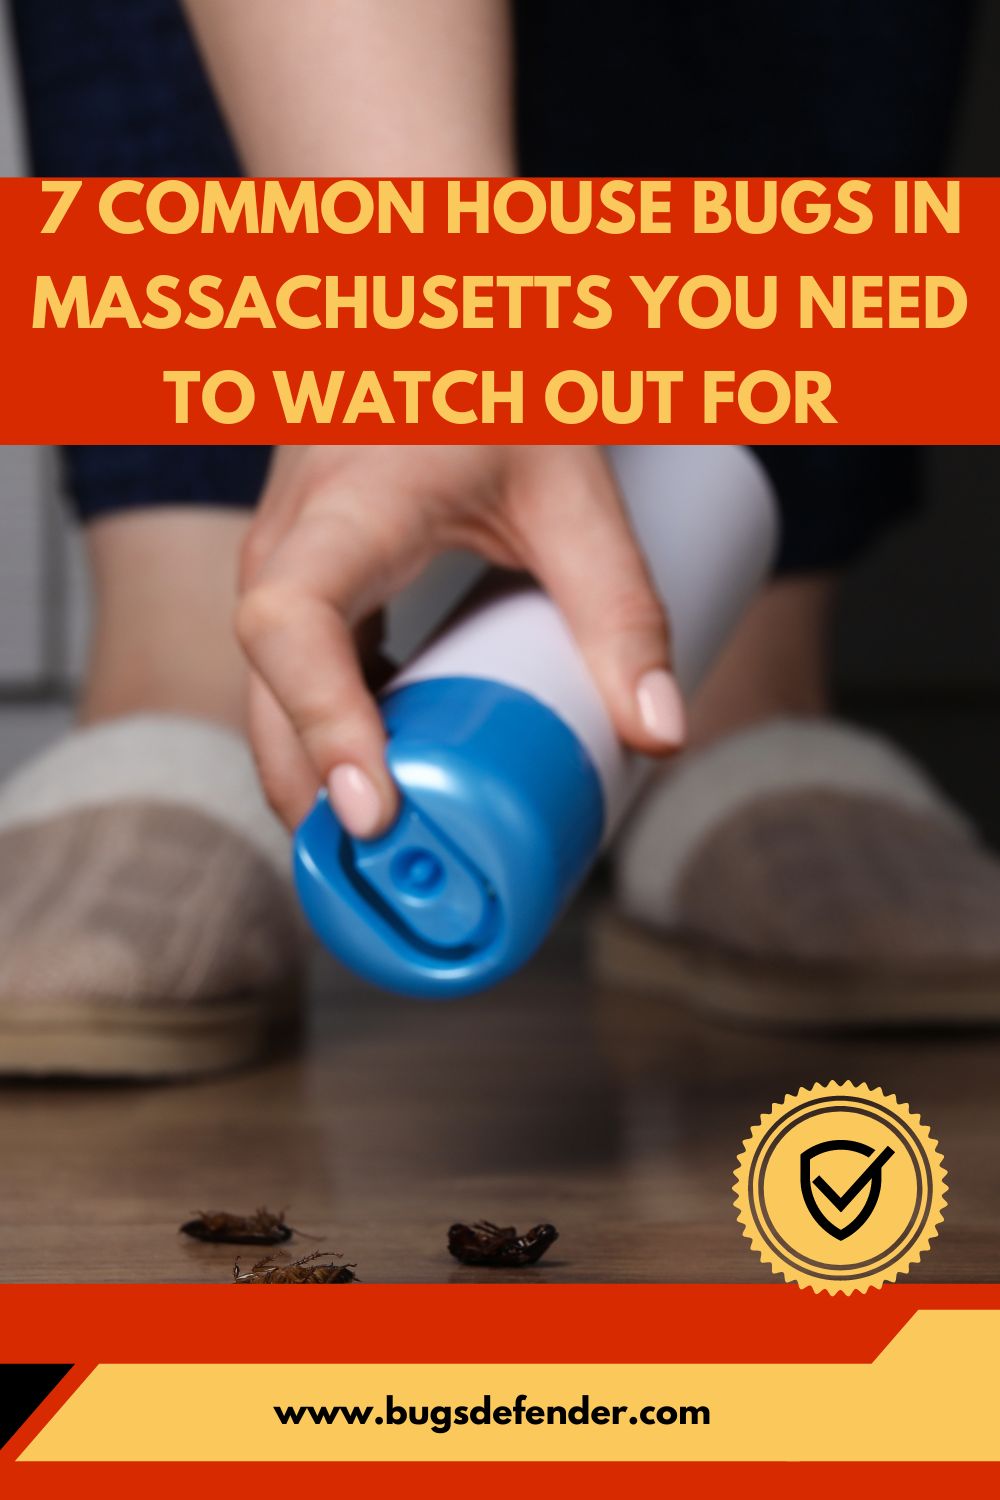 7 Common House Bugs In Massachusetts You Need To Watch Out For pin 2